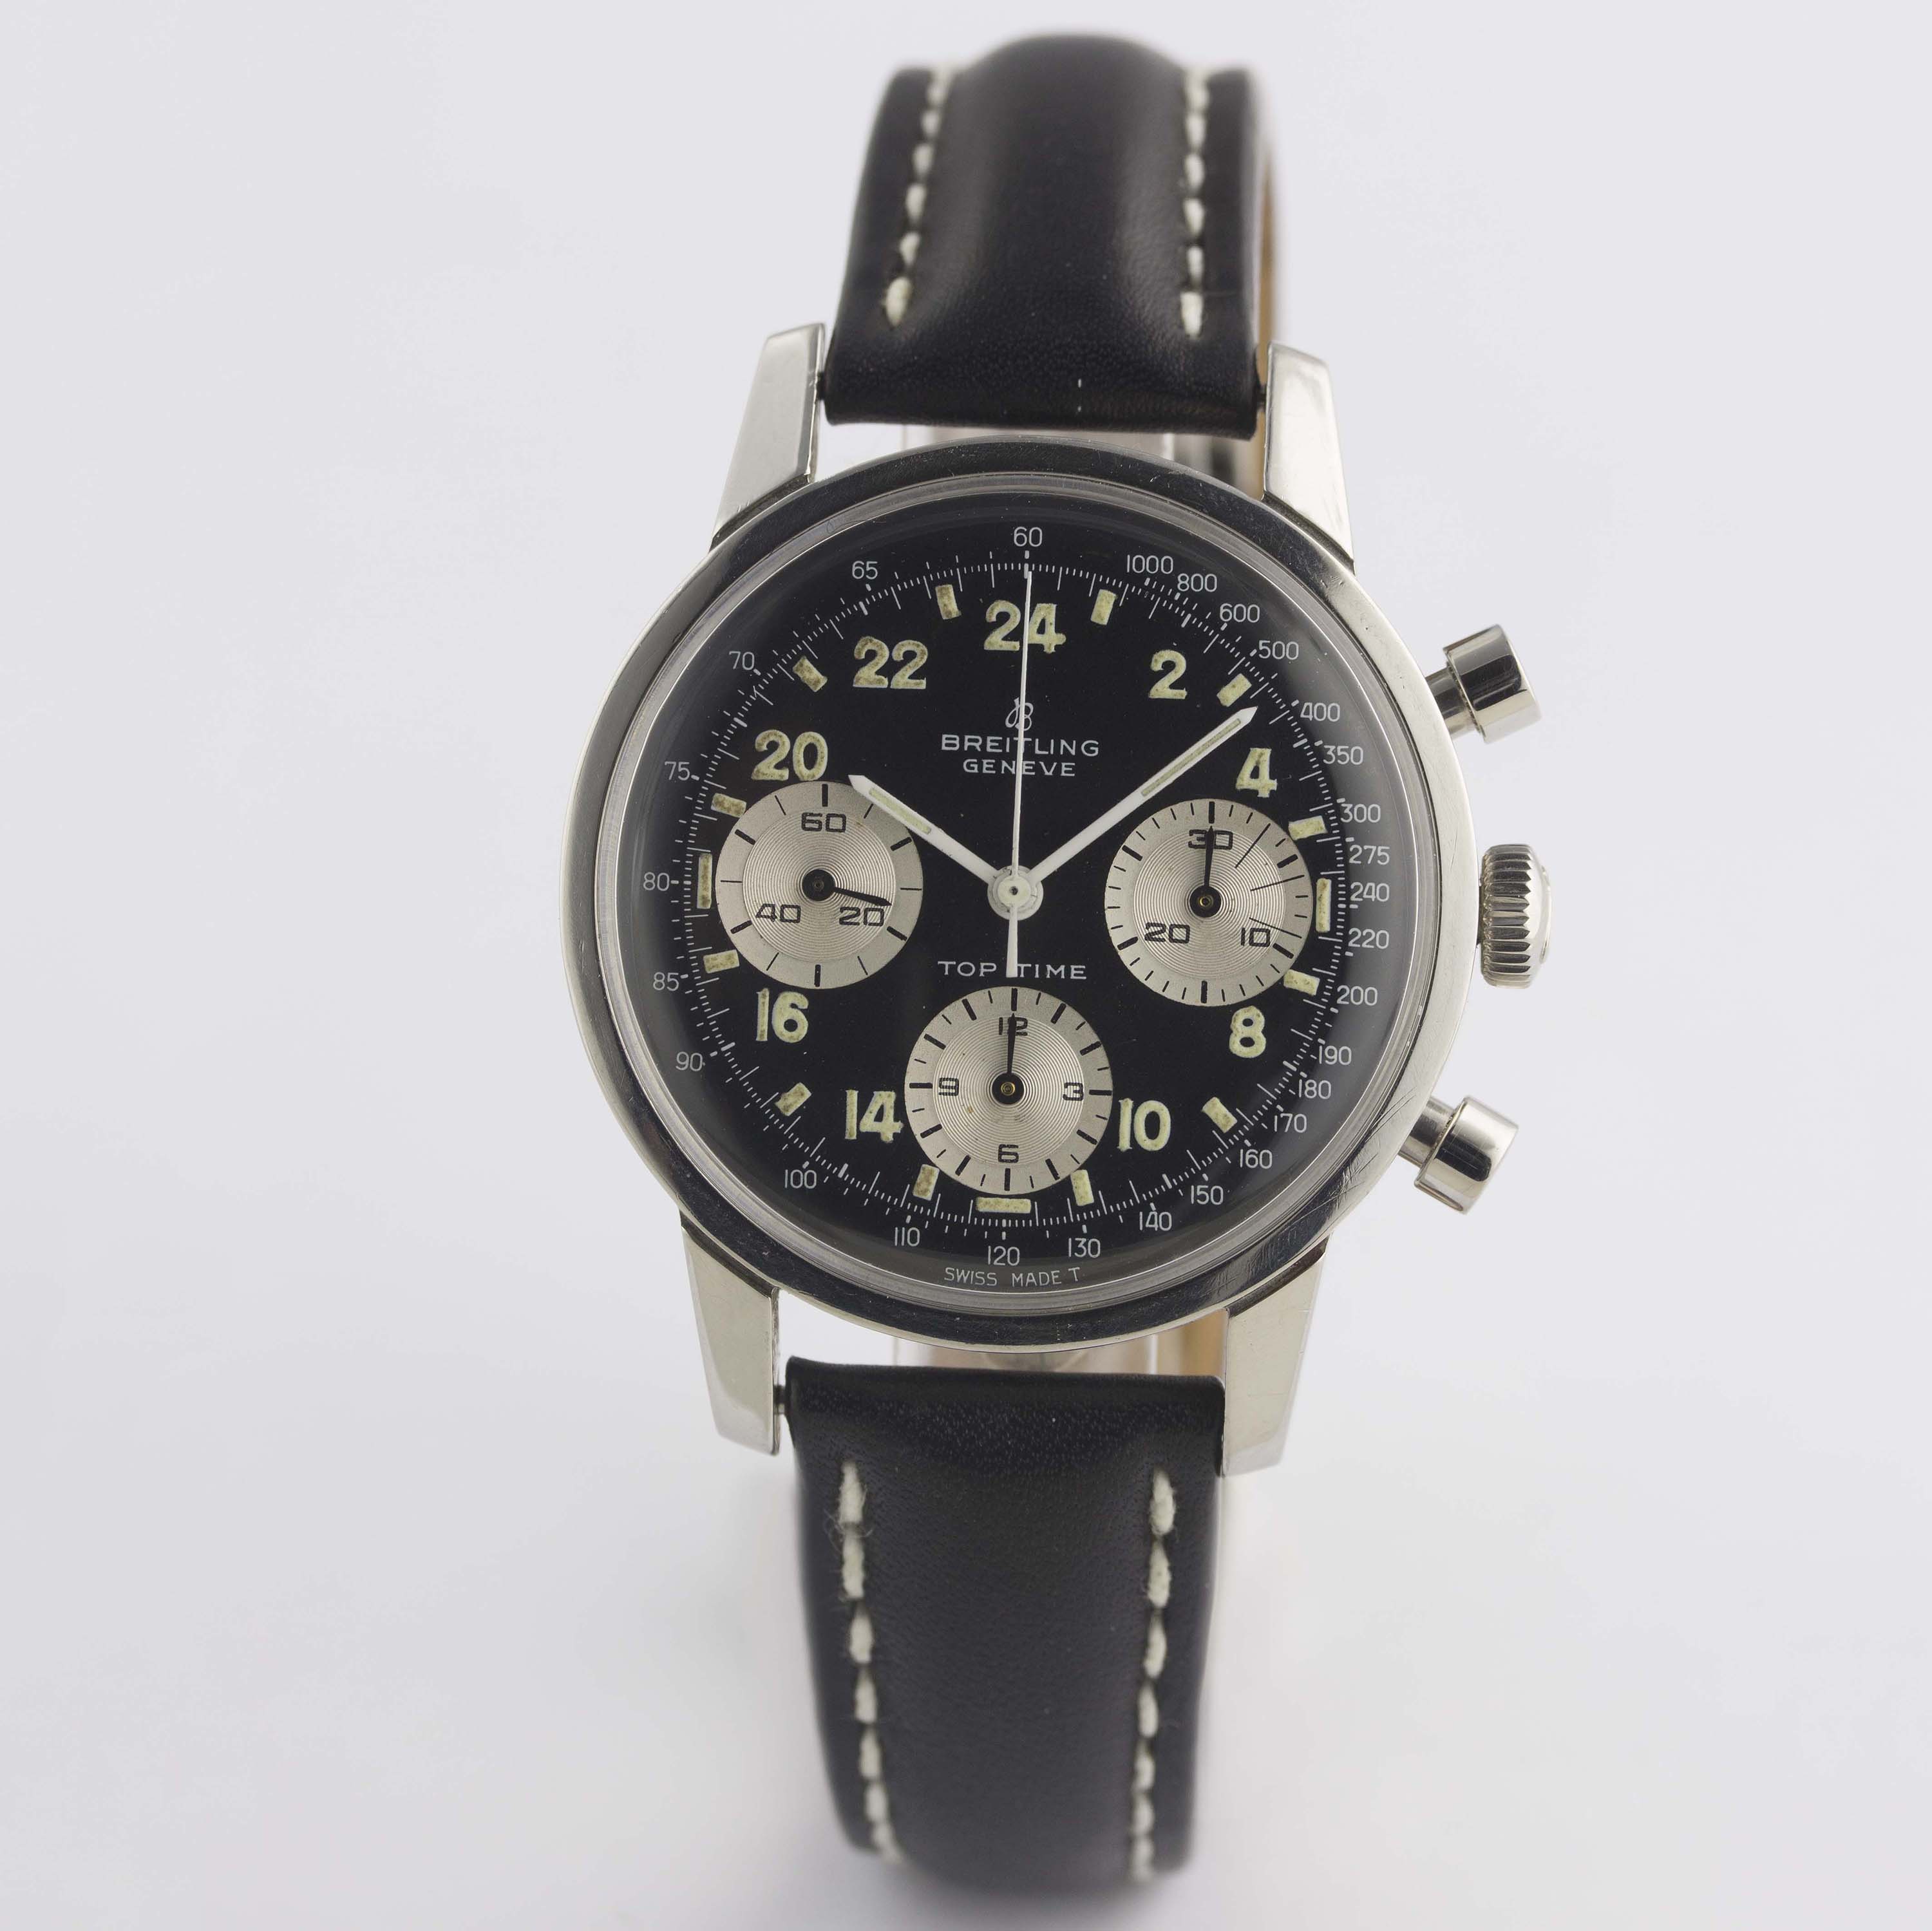 A RARE GENTLEMAN'S STAINLESS STEEL BREITLING TOP TIME 24 HOUR CHRONOGRAPH WRIST WATCH CIRCA 1968, - Image 3 of 12